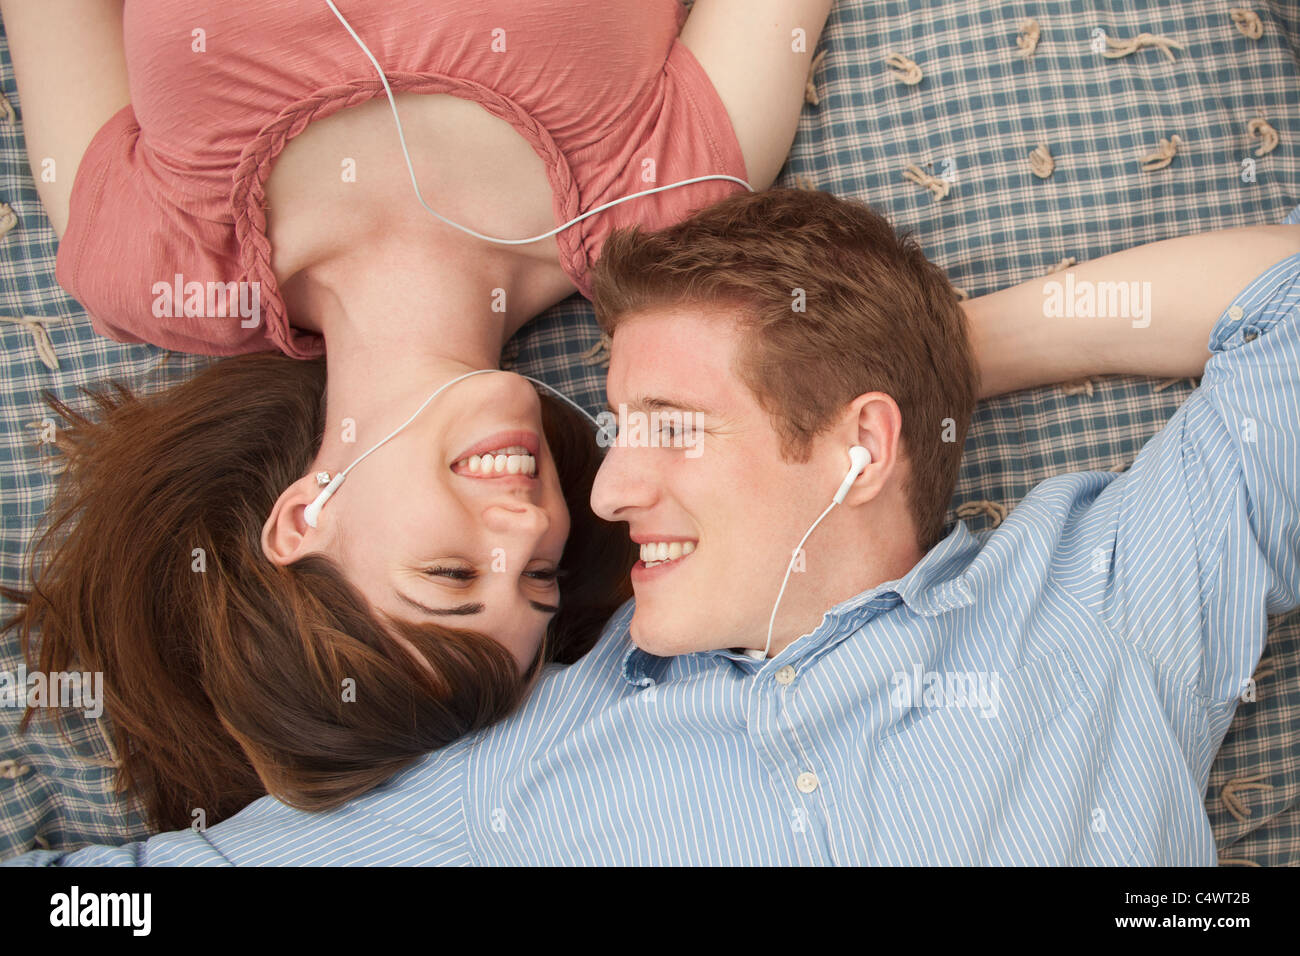 USA, Utah, Provo, Young couple with mp3 player lying on blanket Banque D'Images